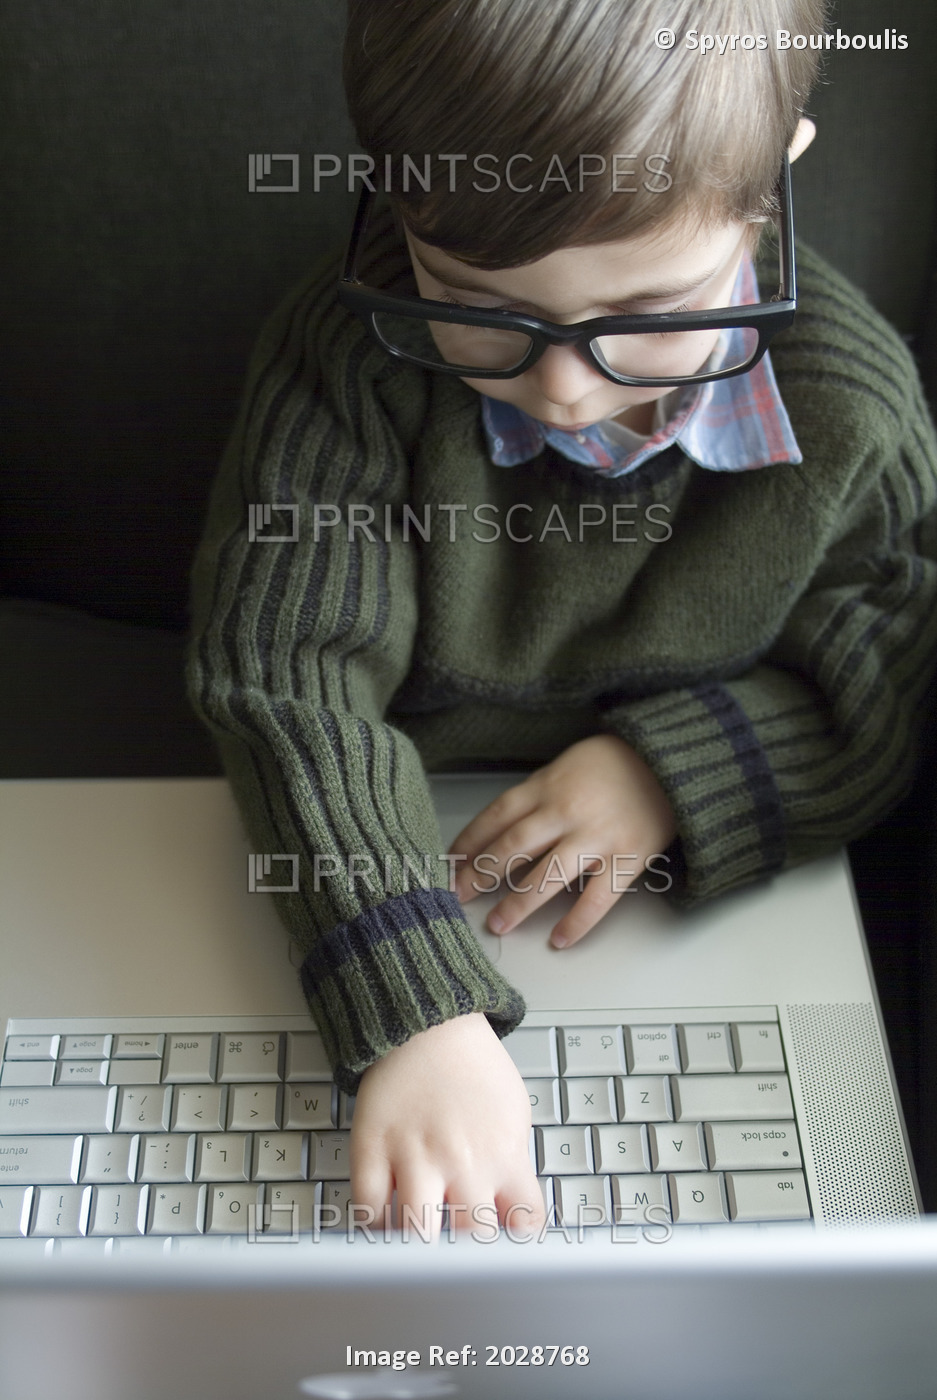 Little Boy With Large Glasses Typing On A Laptop Computer, Montreal, Quebec